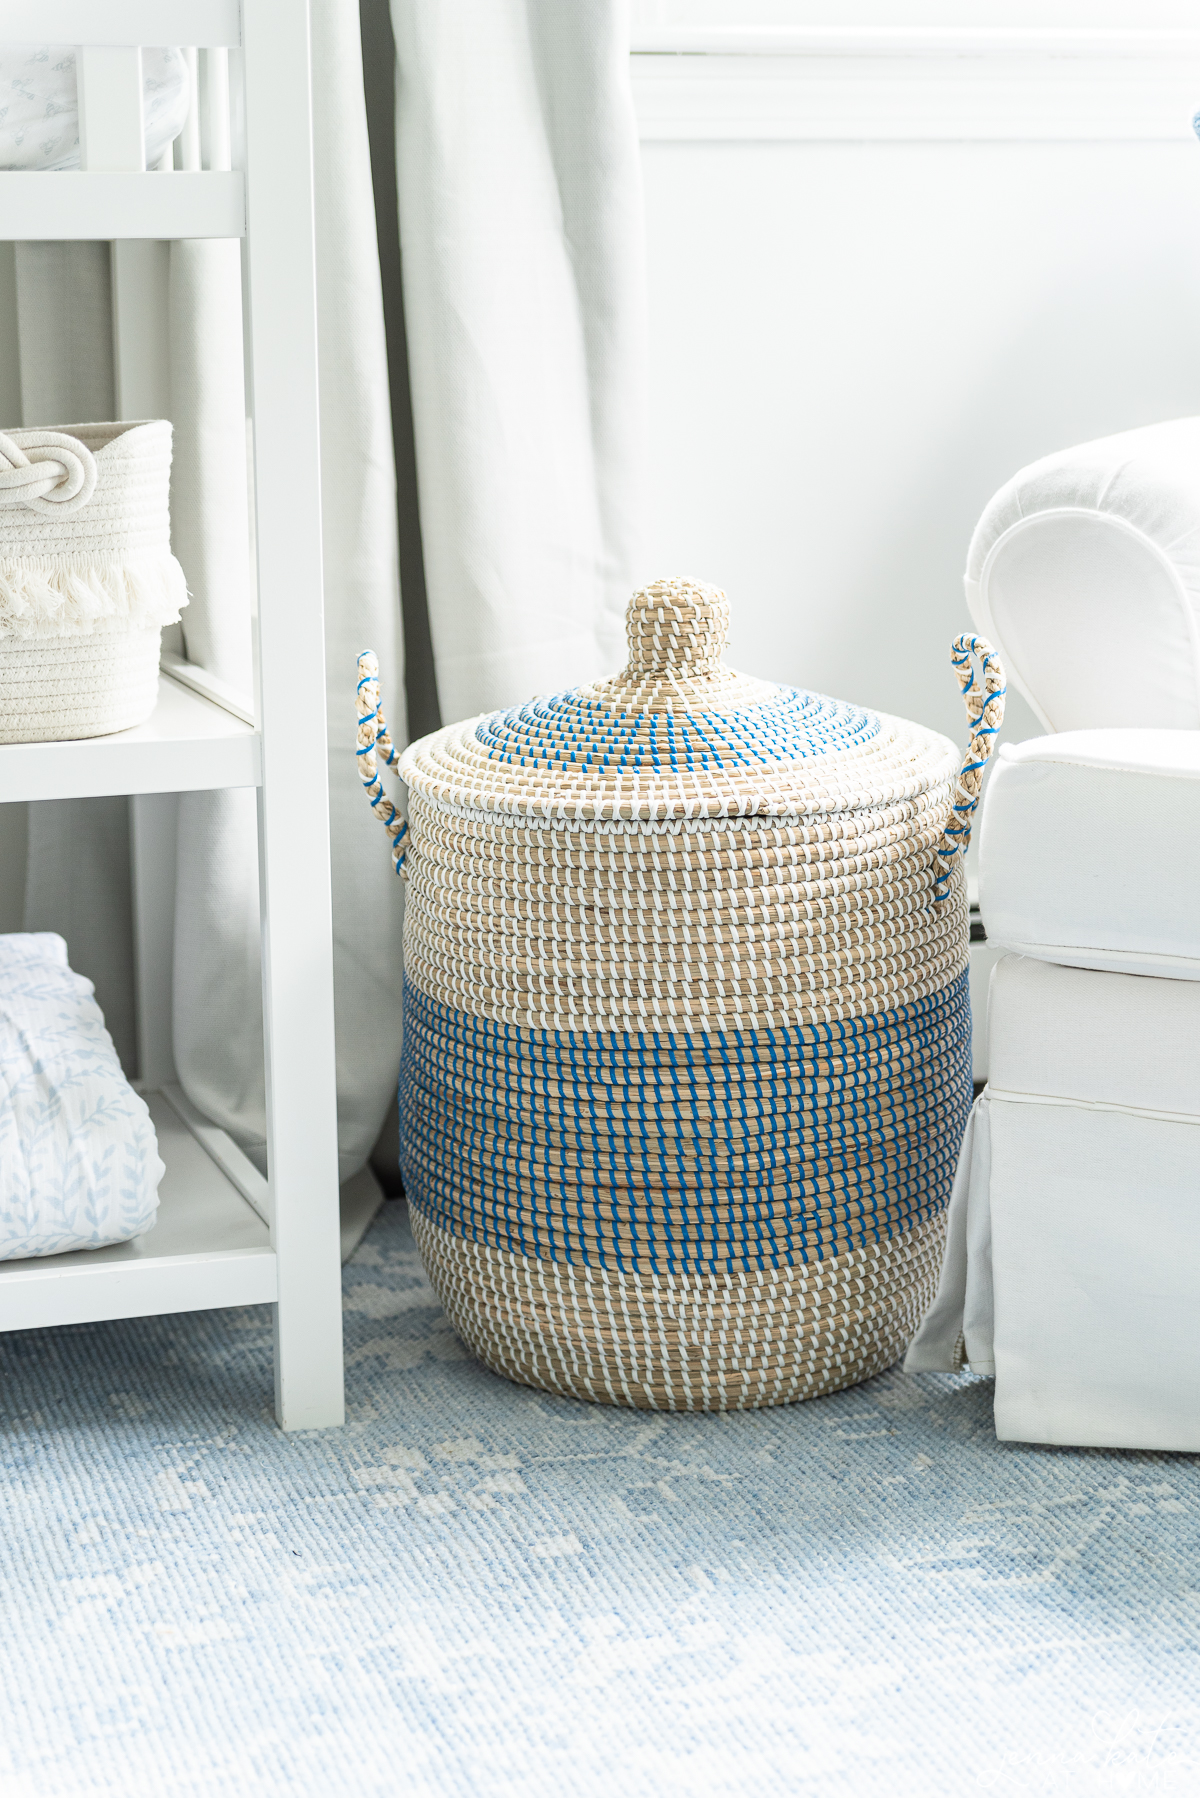 Serena & Lily blue la jolla basket to be used as a laundry basket